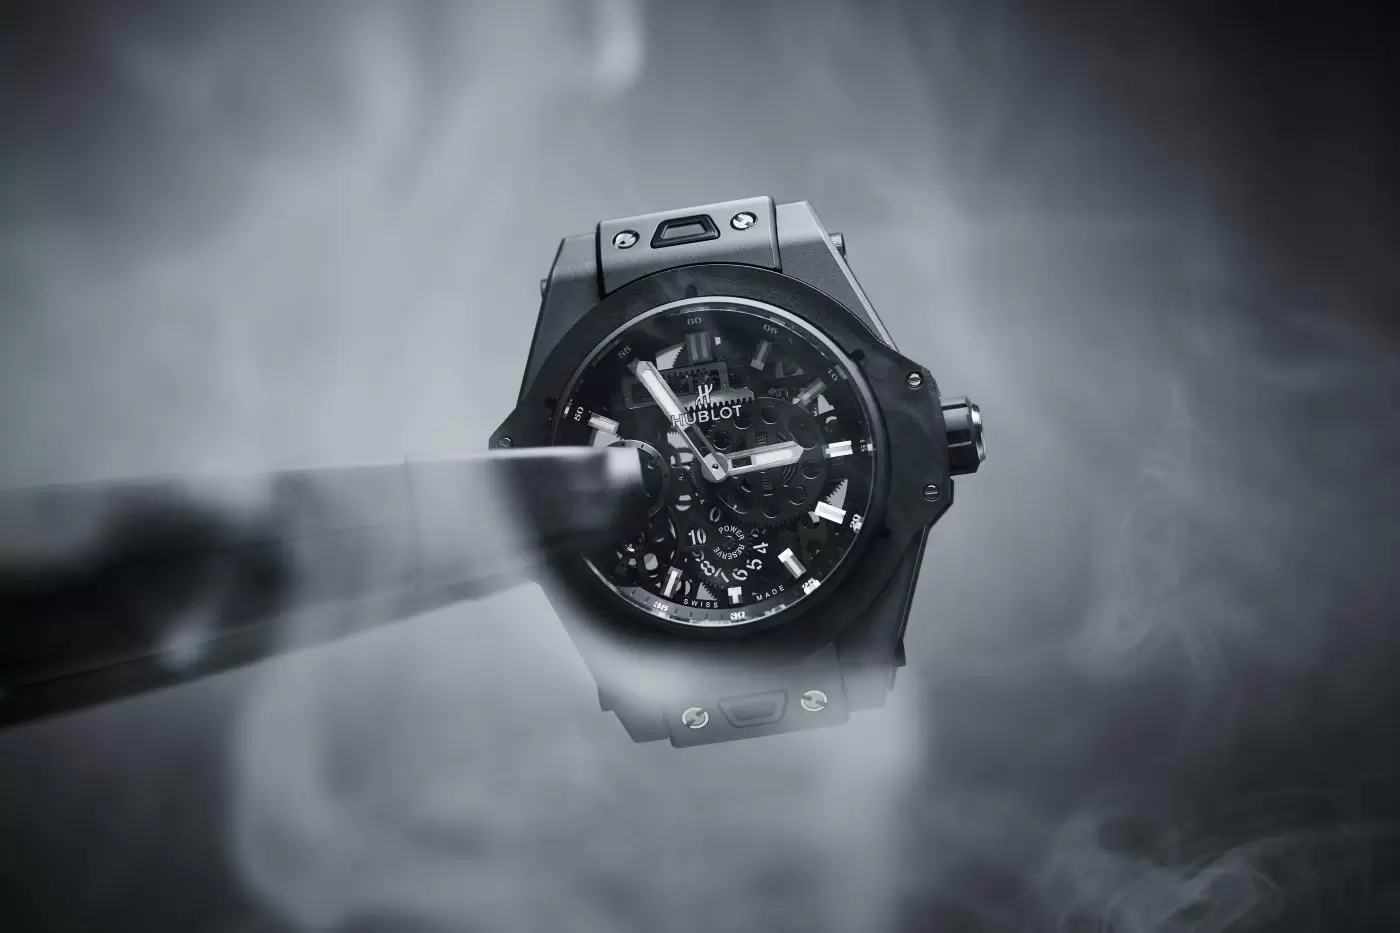 Buy Hublot watches on sale in London, UK Watches of Mayfair